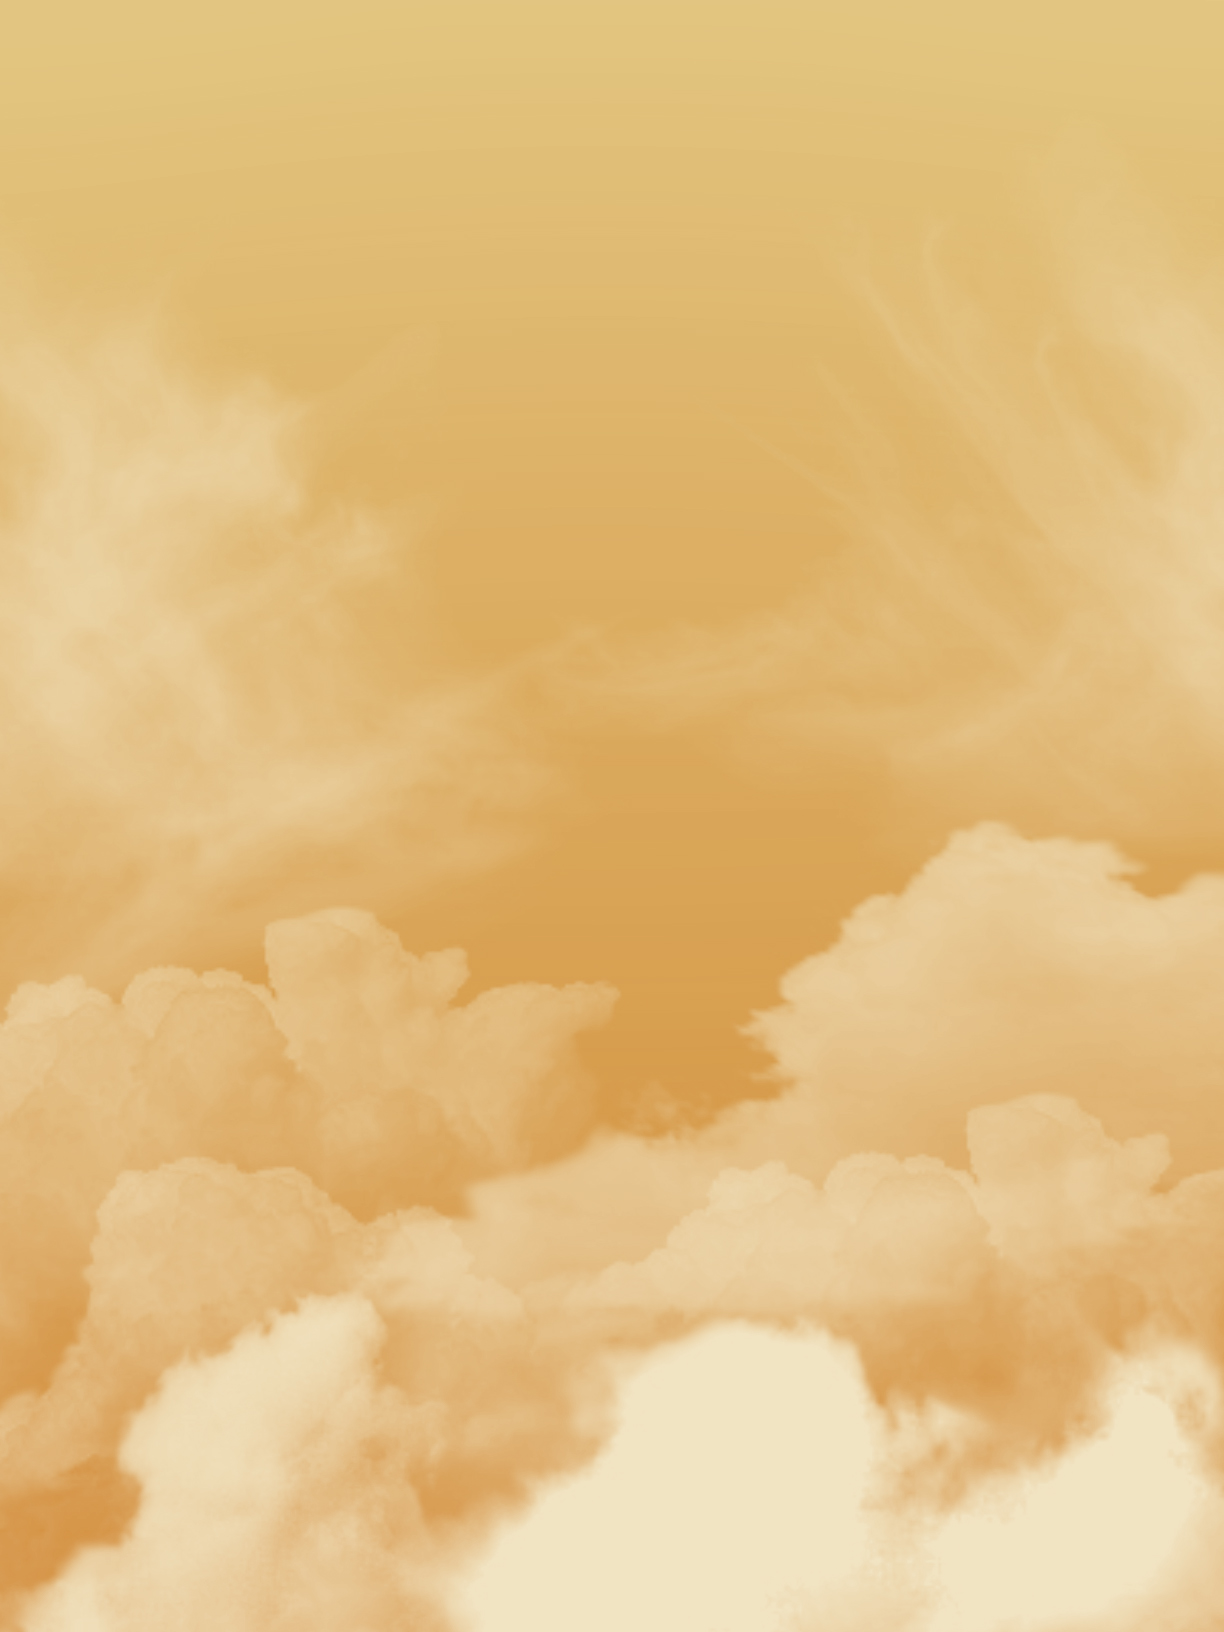 Heavenly Skies 2 golden by SimplyBackgrounds on DeviantArt